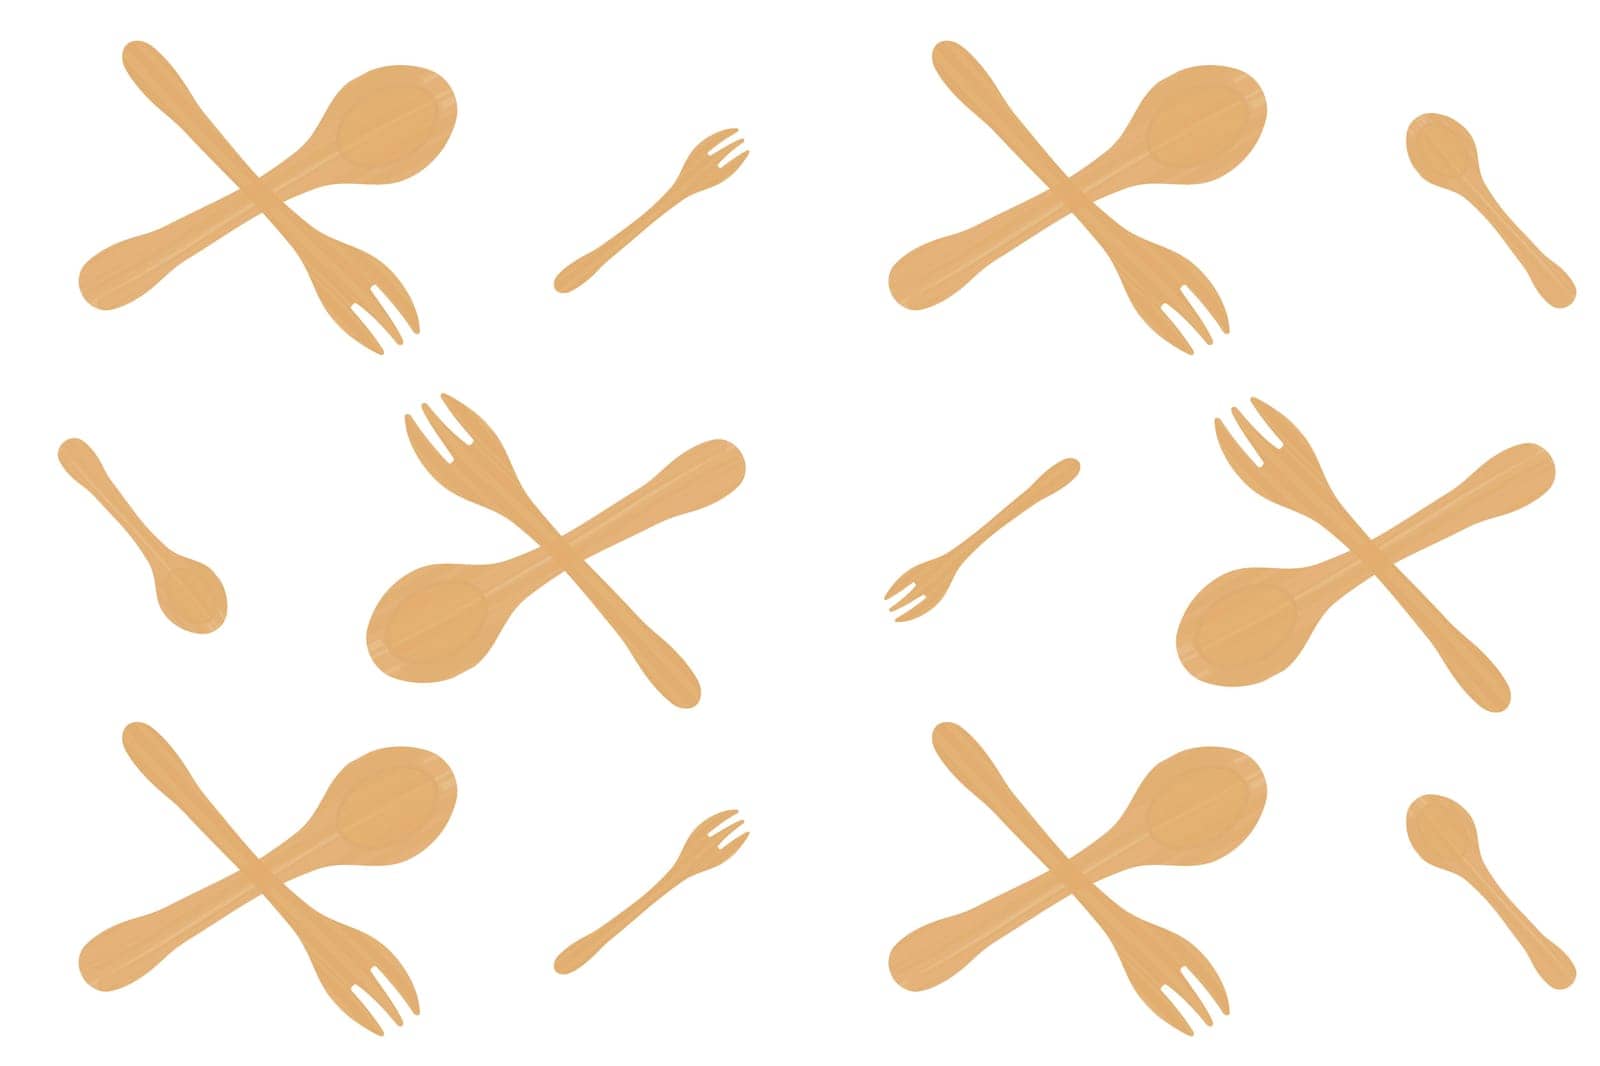 Pattern of wooden bamboo spoons and forks on a white background. The concept of ecology, environmental protection, waste recycling. Vector image. by IronG96